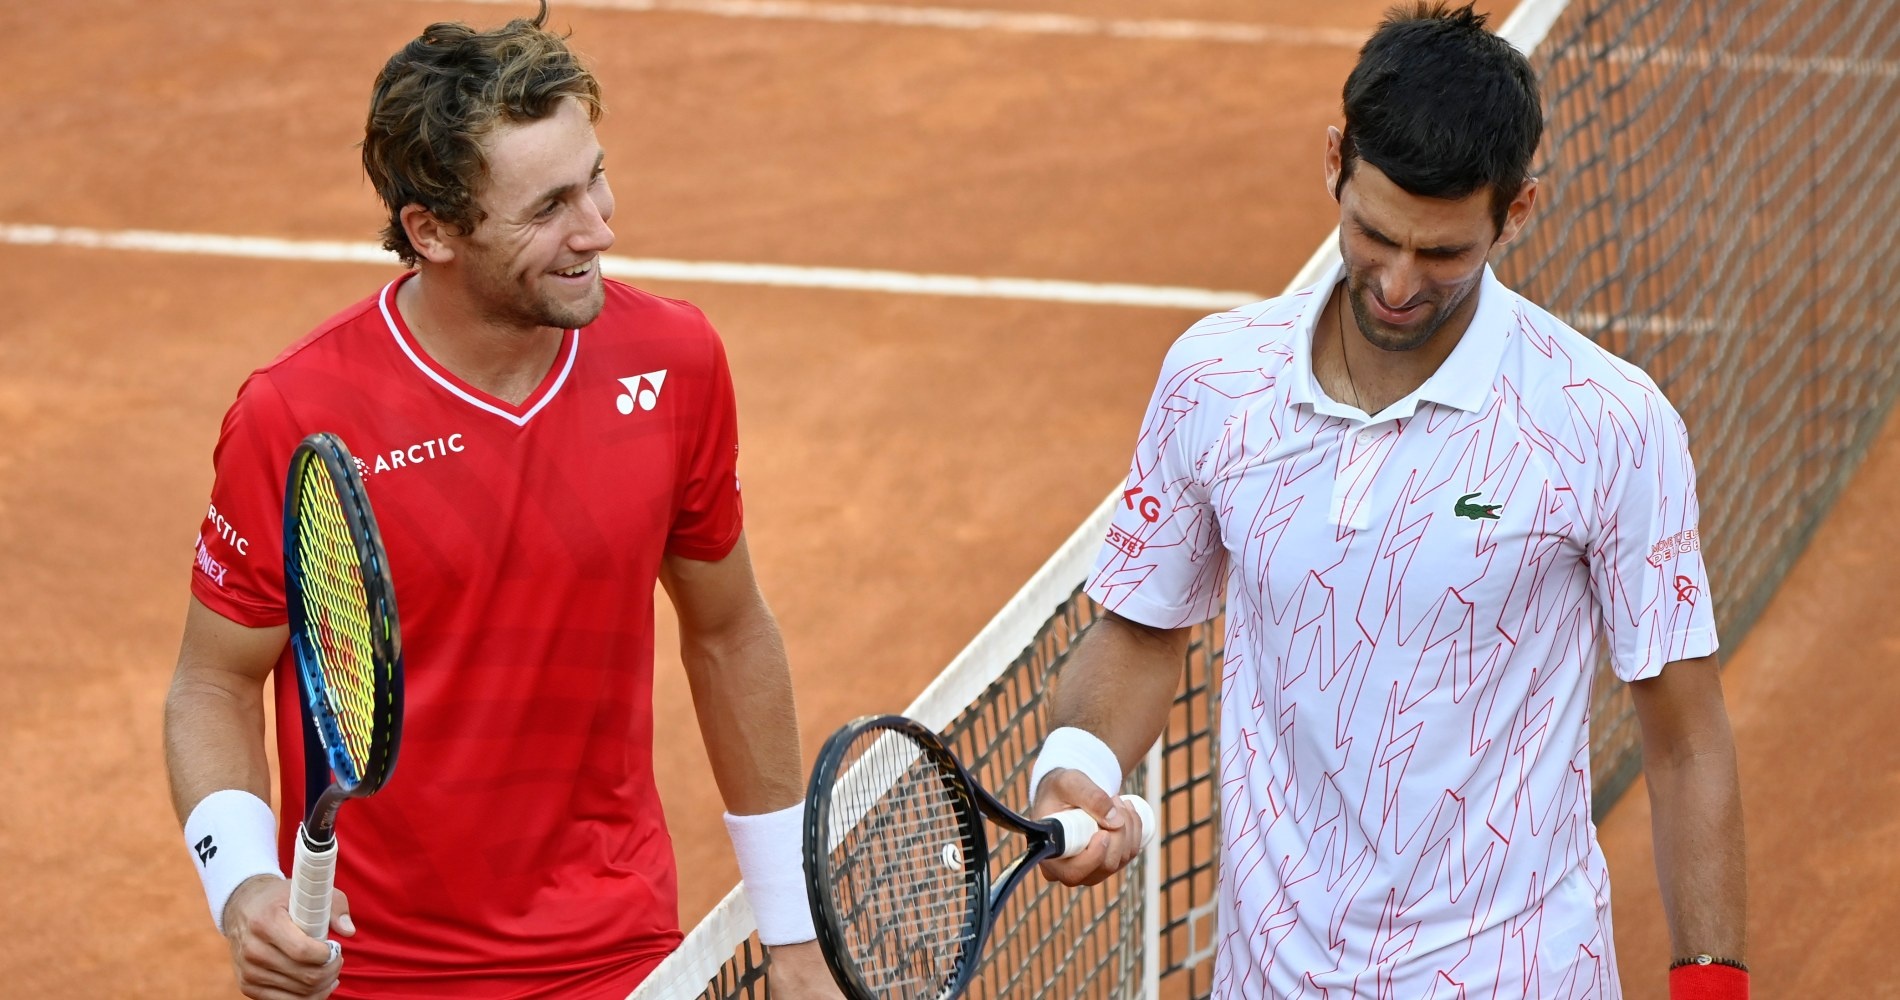 Novak Djokovic and Casper Ruud are set to face off for the Nitto ATP